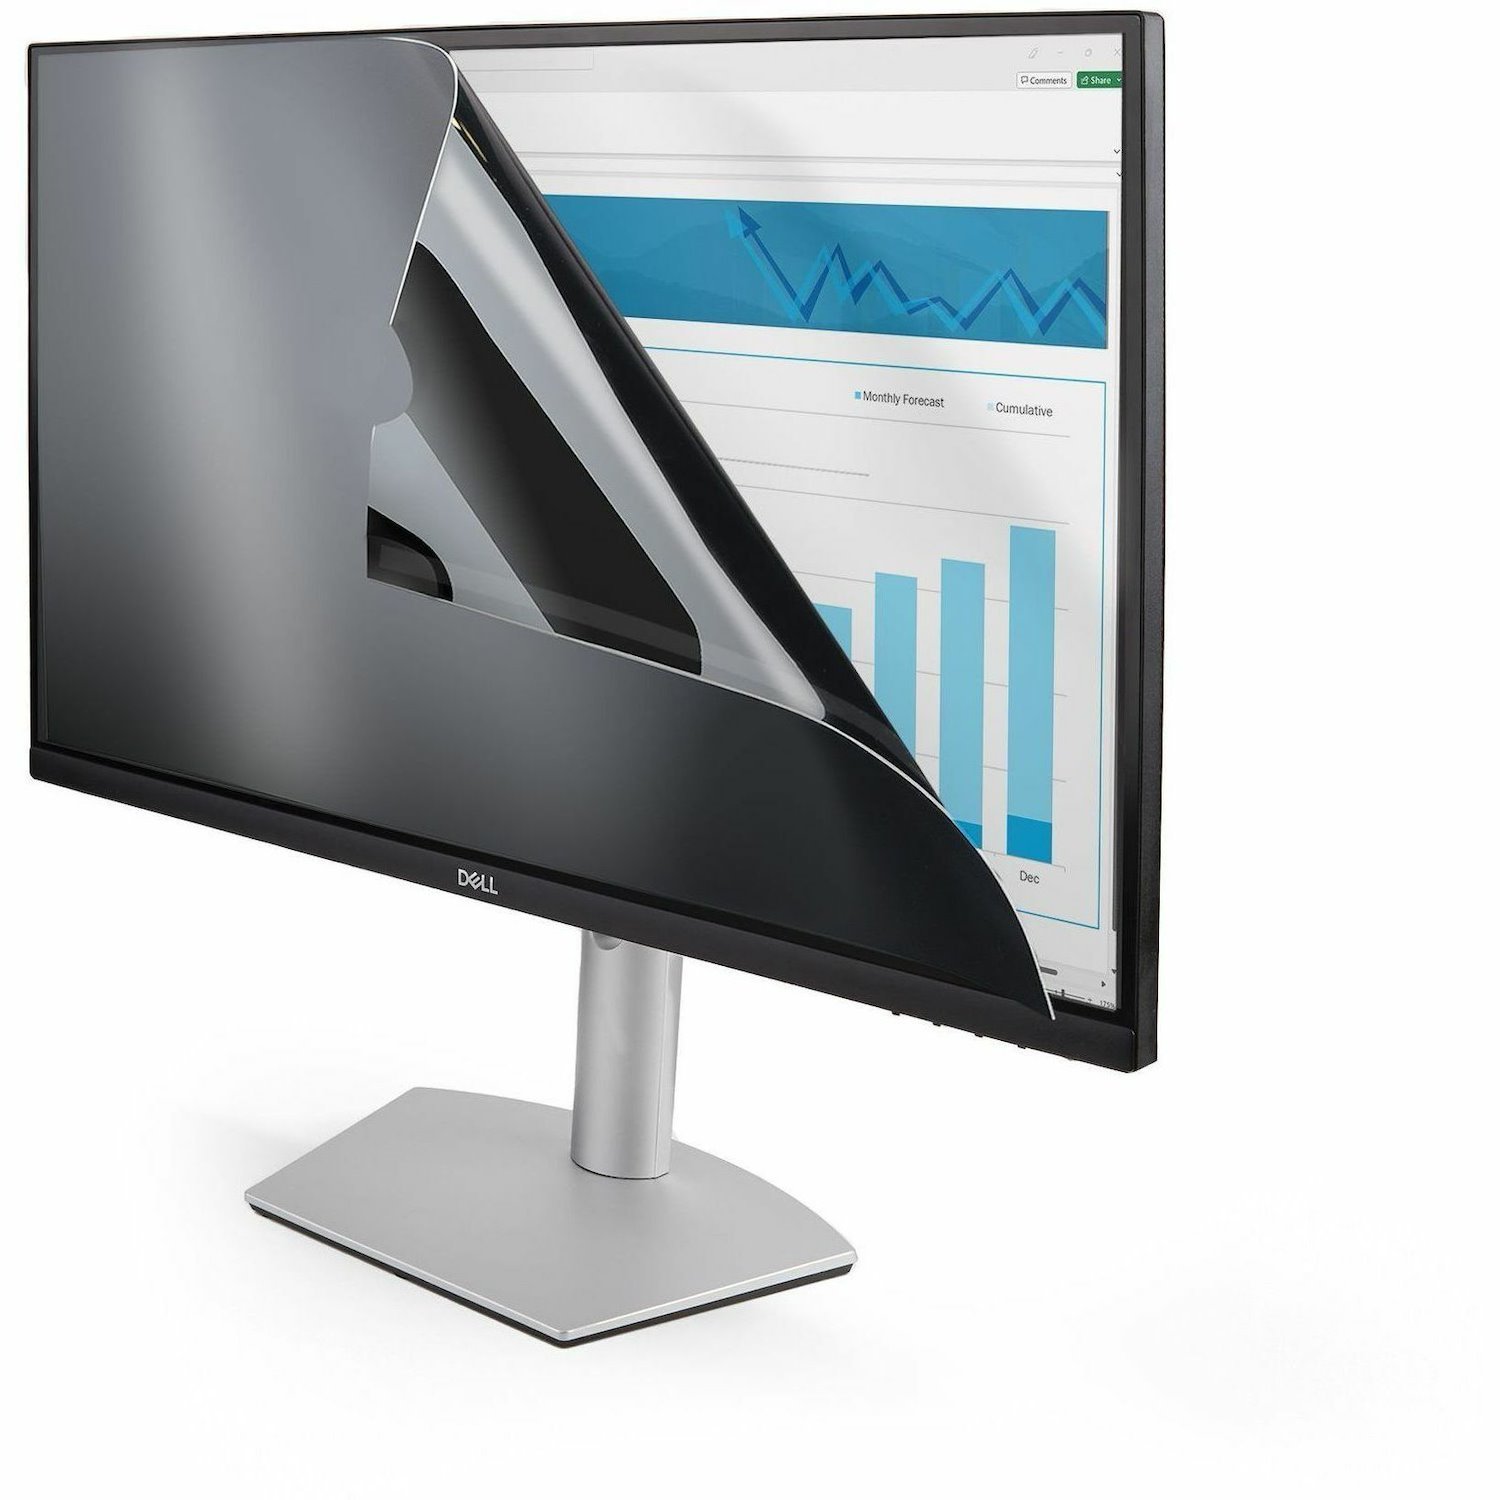 StarTech.com 25-inch 16:9 Computer Monitor Privacy Screen, Anti-Glare Privacy Filter w/Blue Light Reduction, +/- 30&deg; View Security Shield